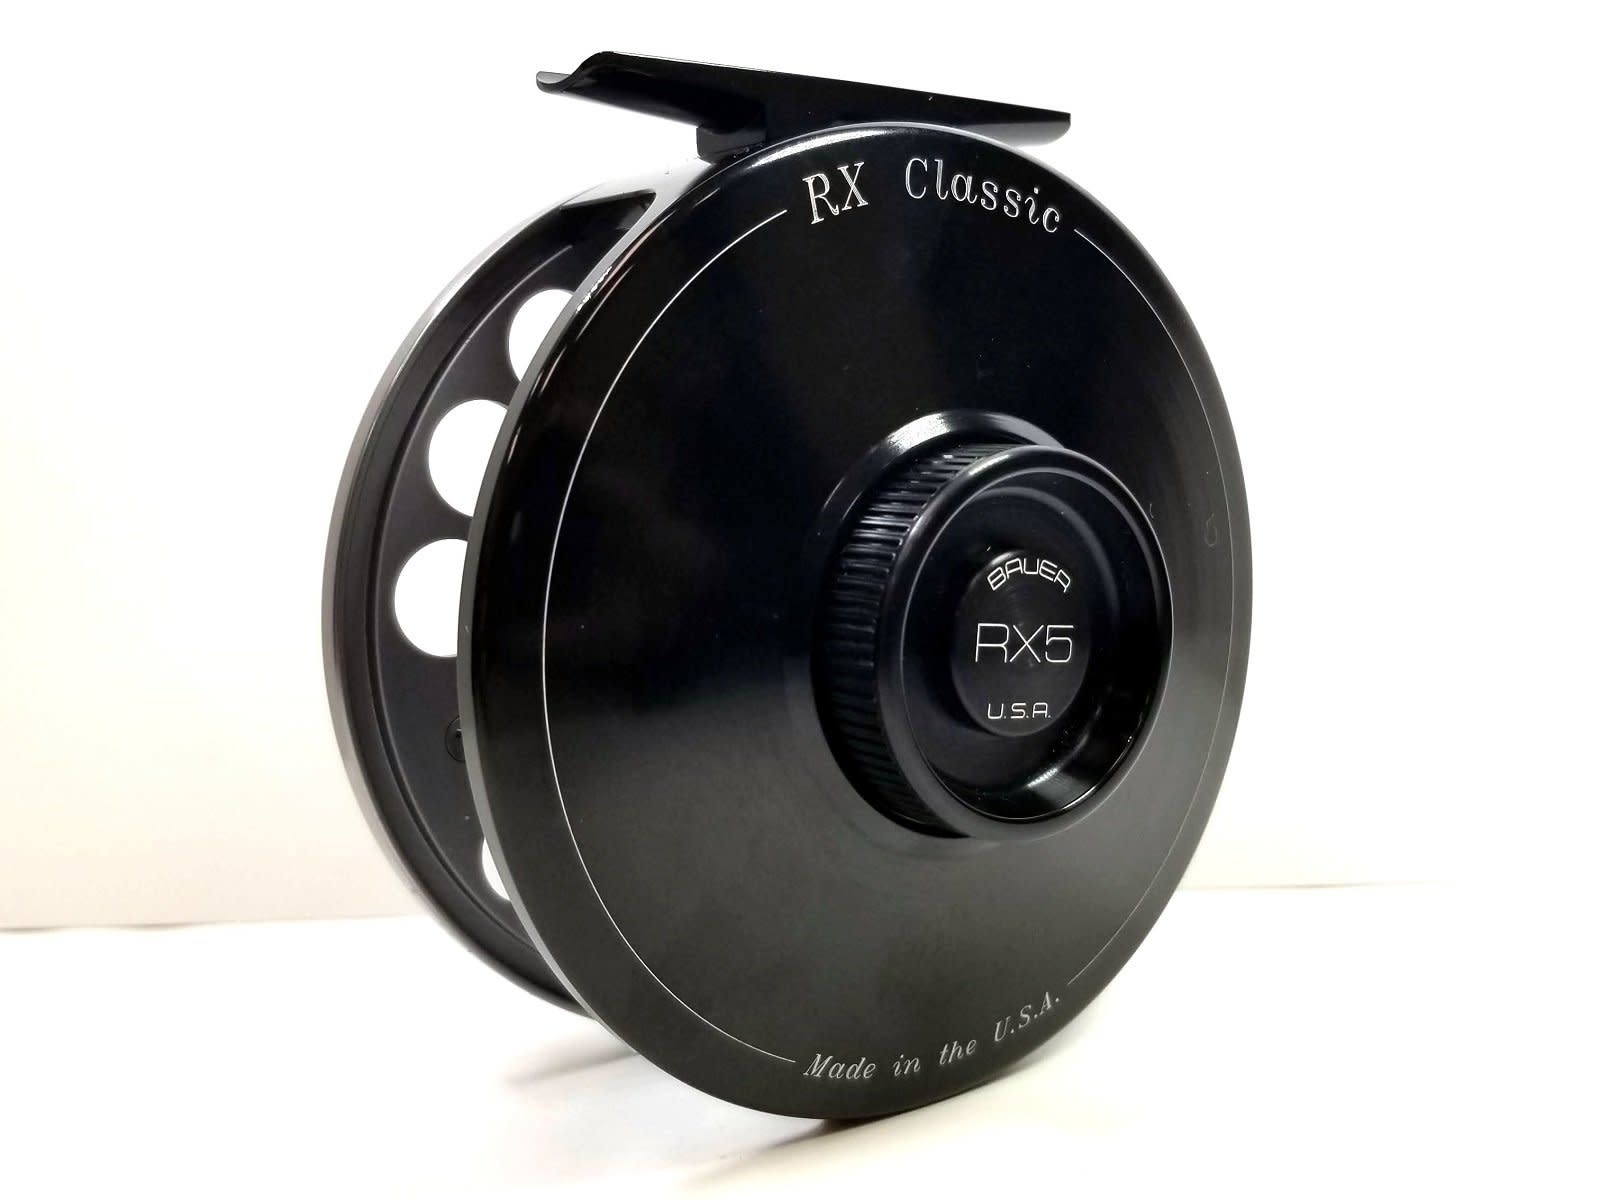 Bauer RX Spey Fly Fishing Reel Product Details